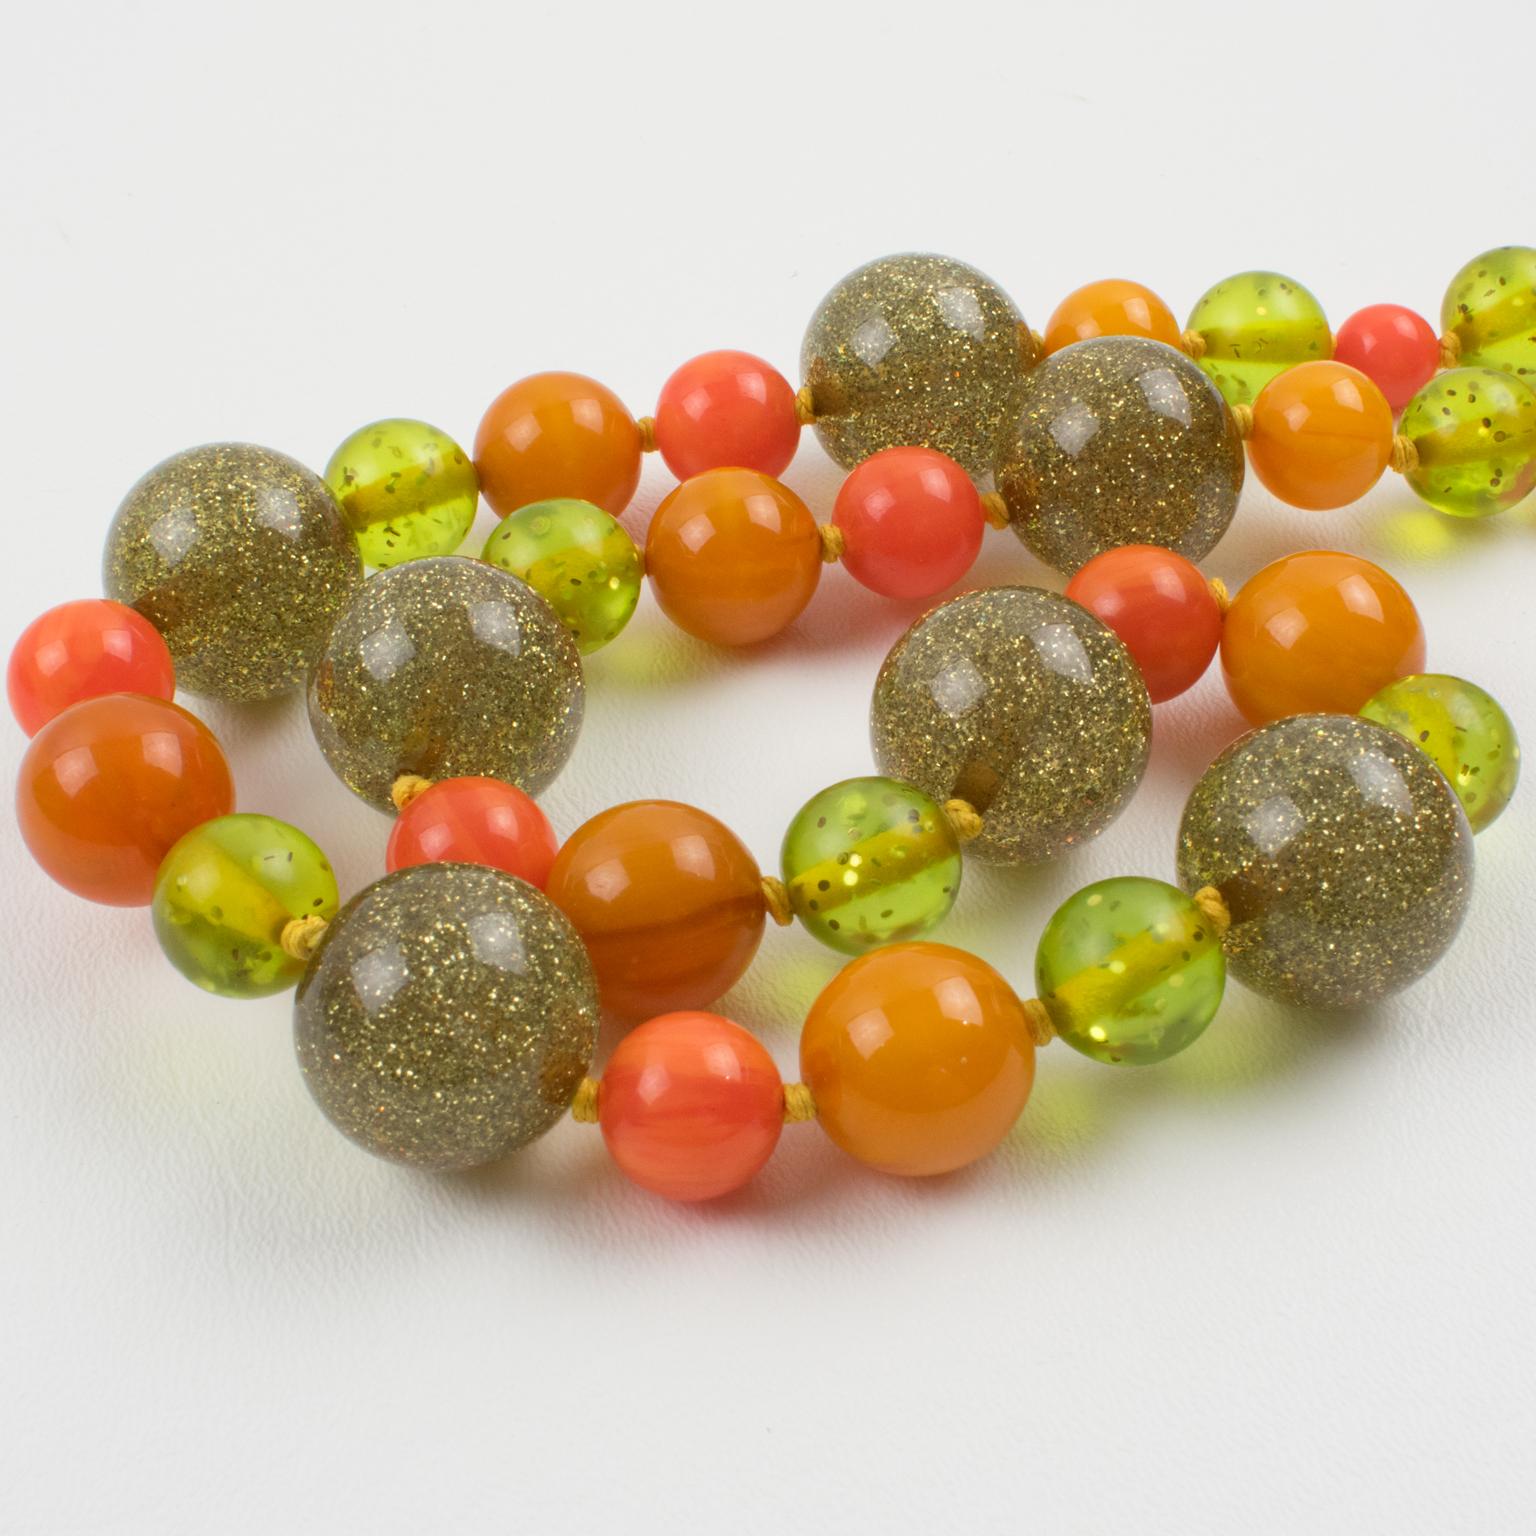 Bakelite and Lucite Extra Long Necklace with Orange, Green and Glitter Beads For Sale 6